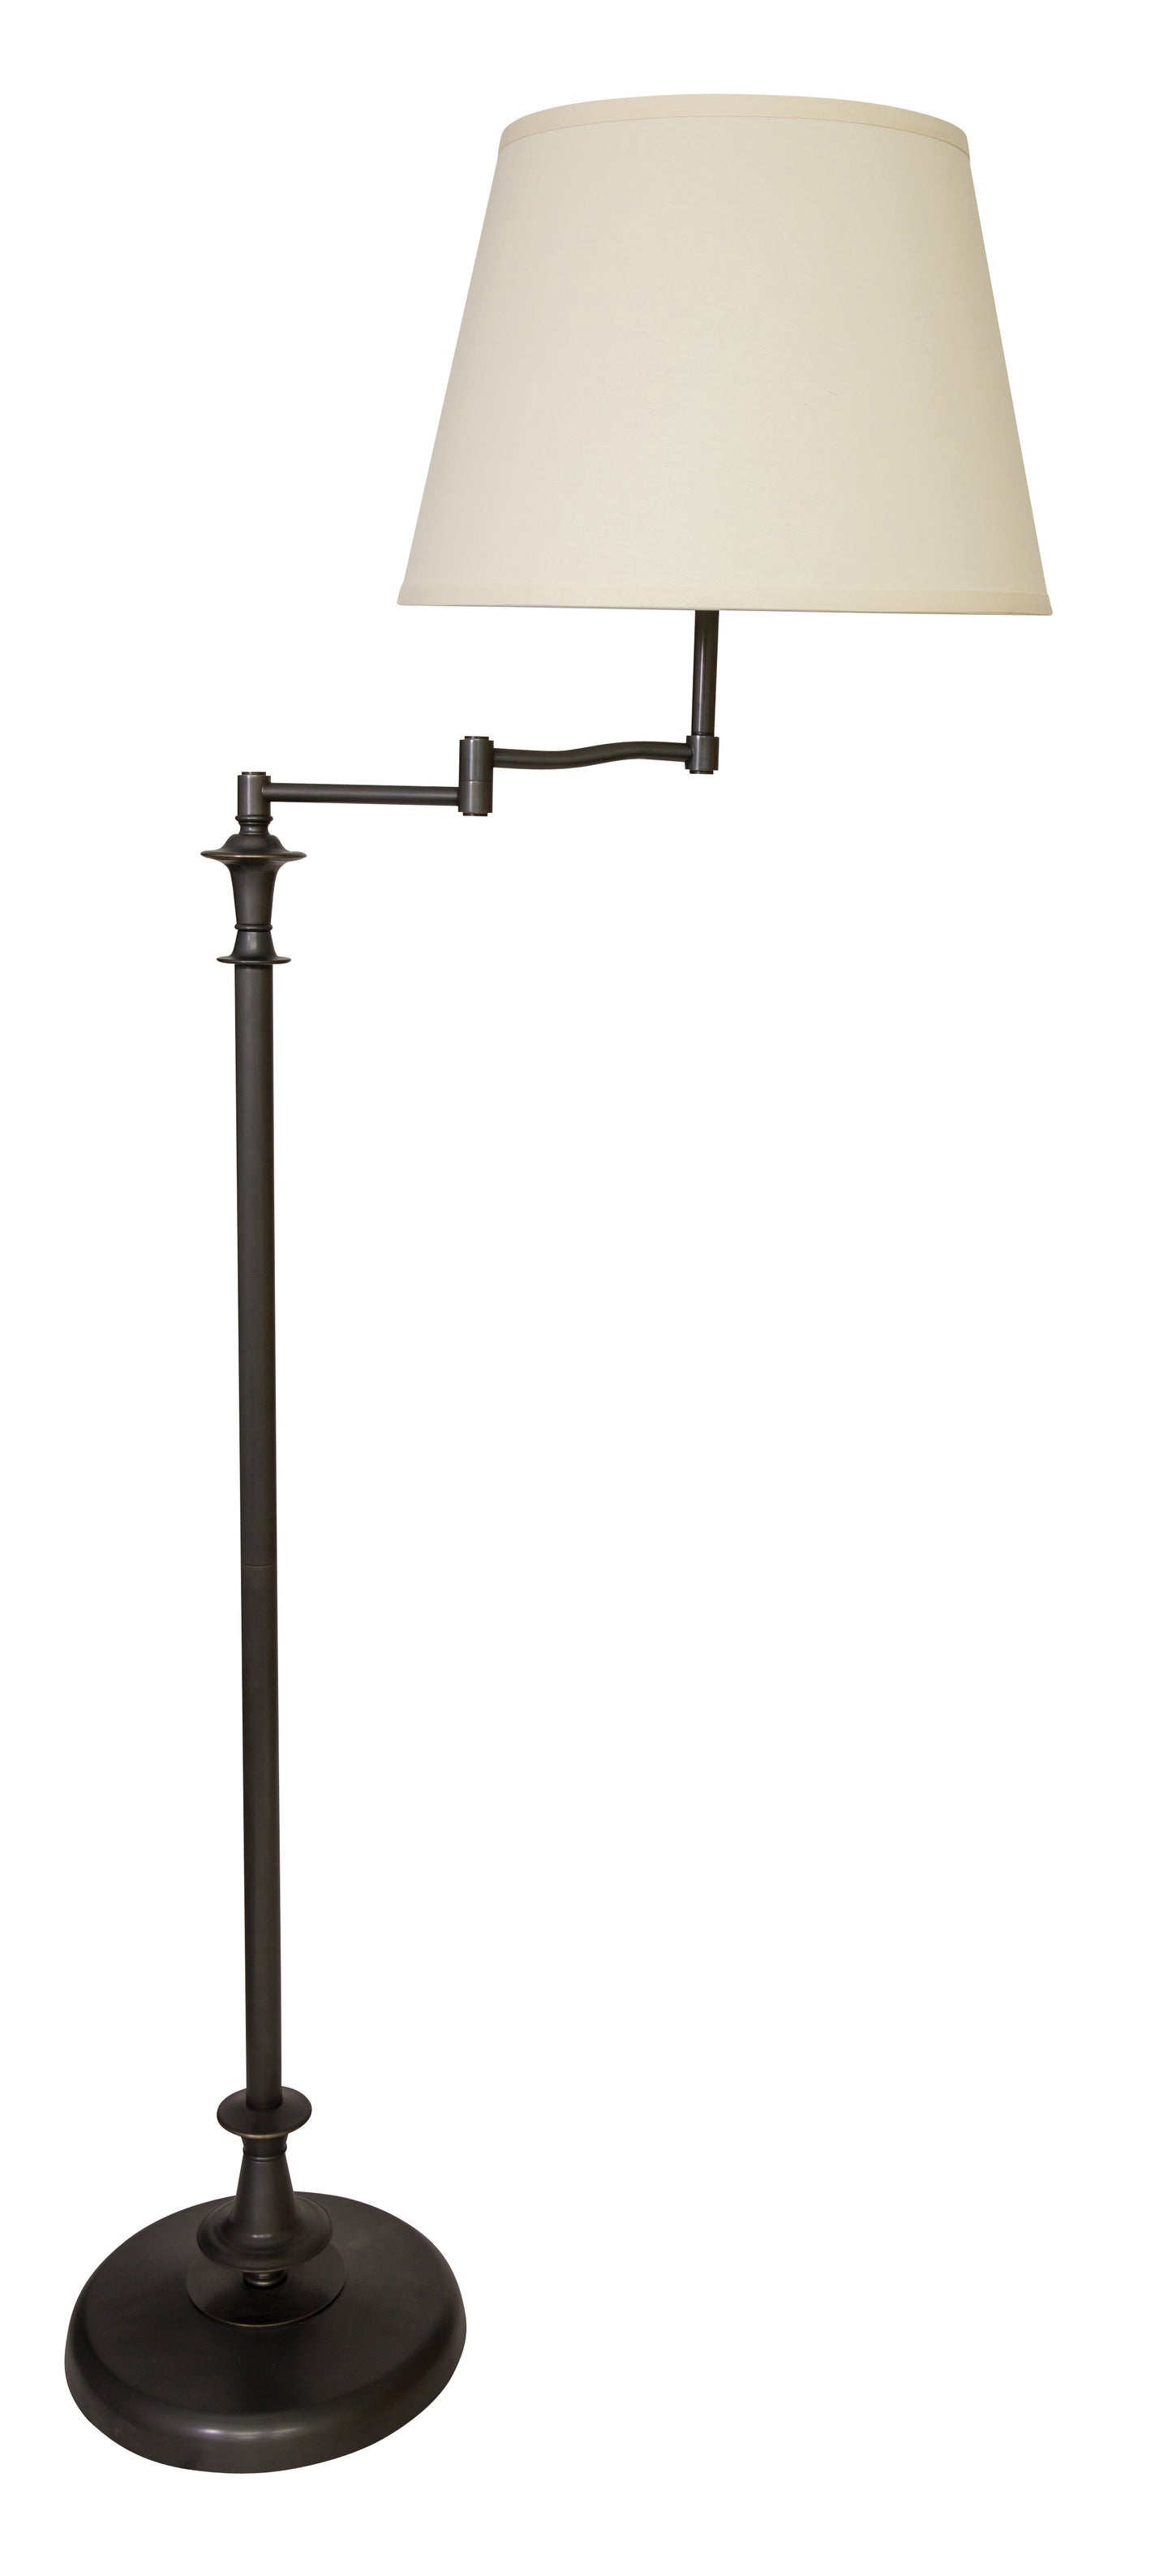 House of Troy Randolph Swing Arm Floor Lamp in Oil Rubbed Bronze RA301-OB